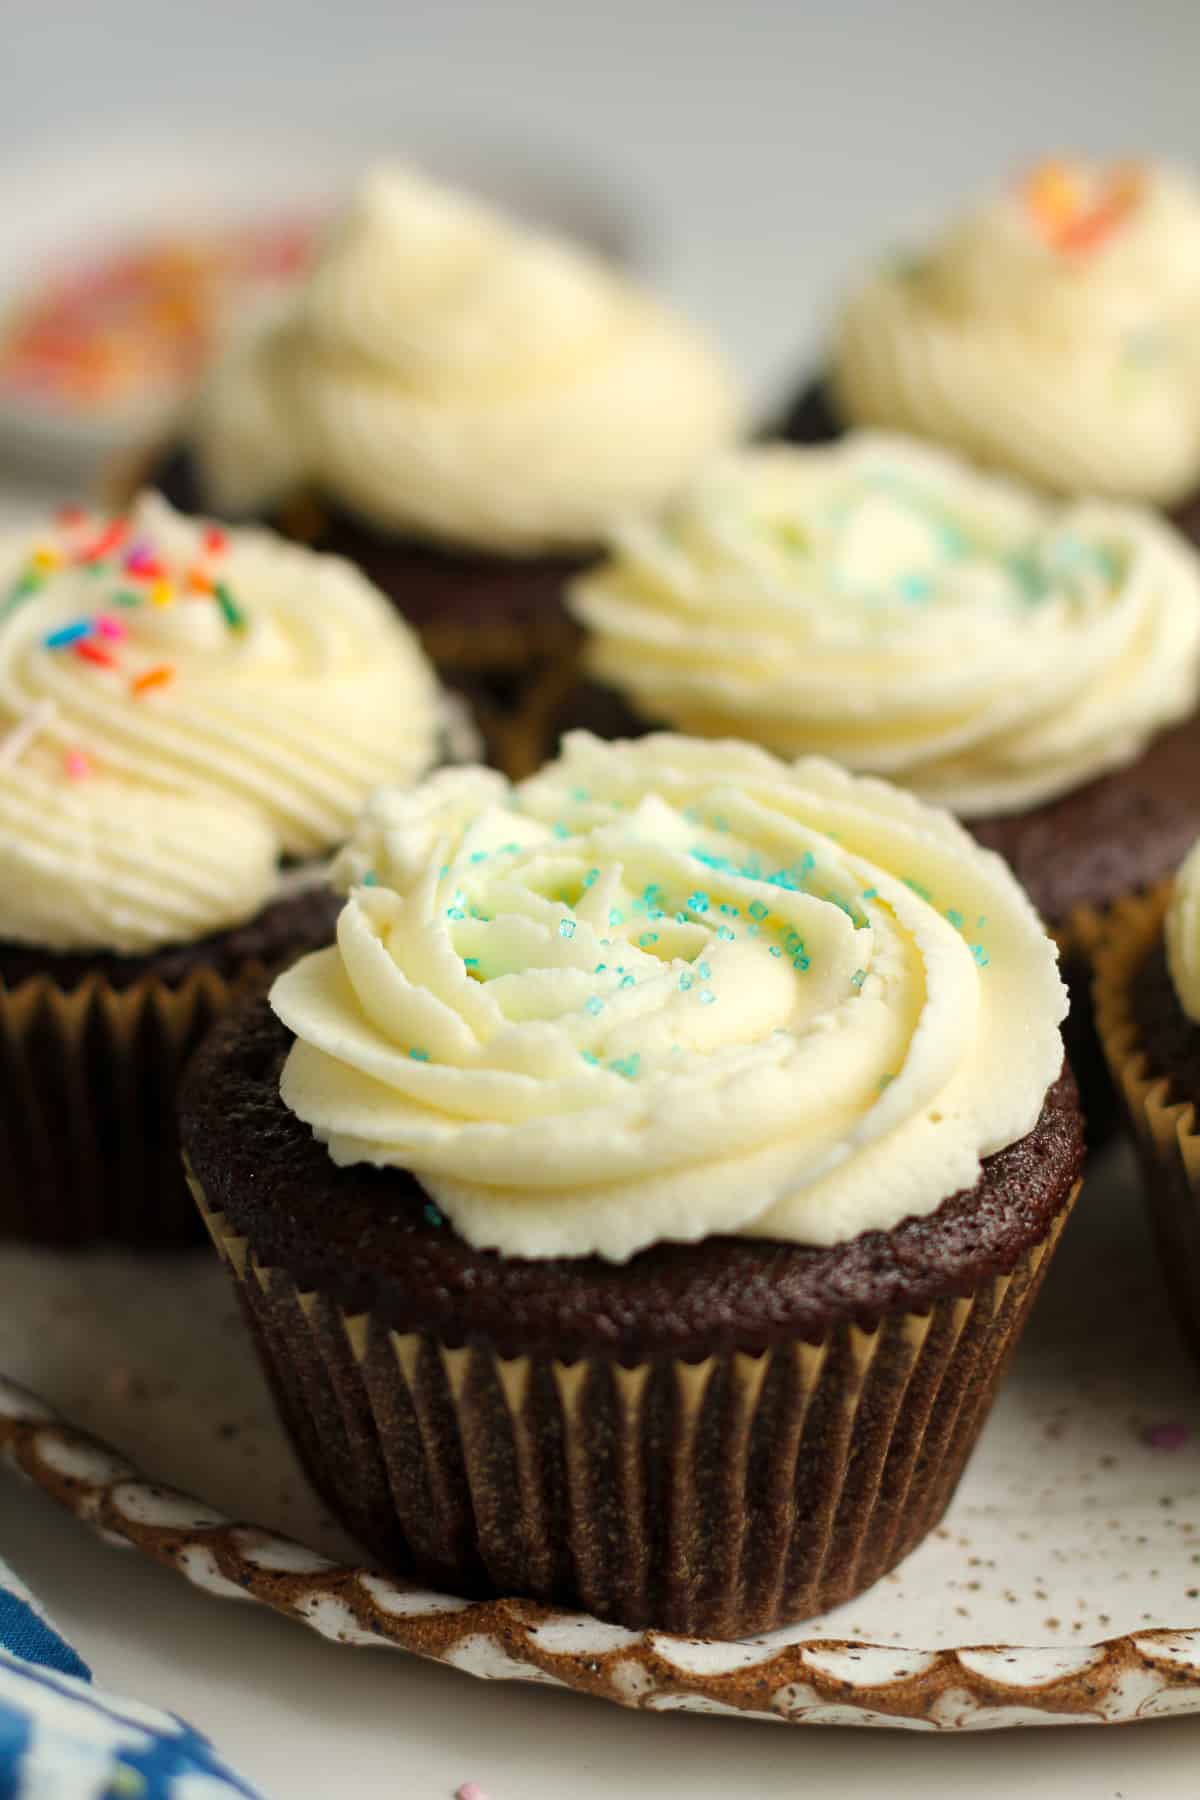 Side view of a plate of chocolate cupcakes with vanilla buttercream.